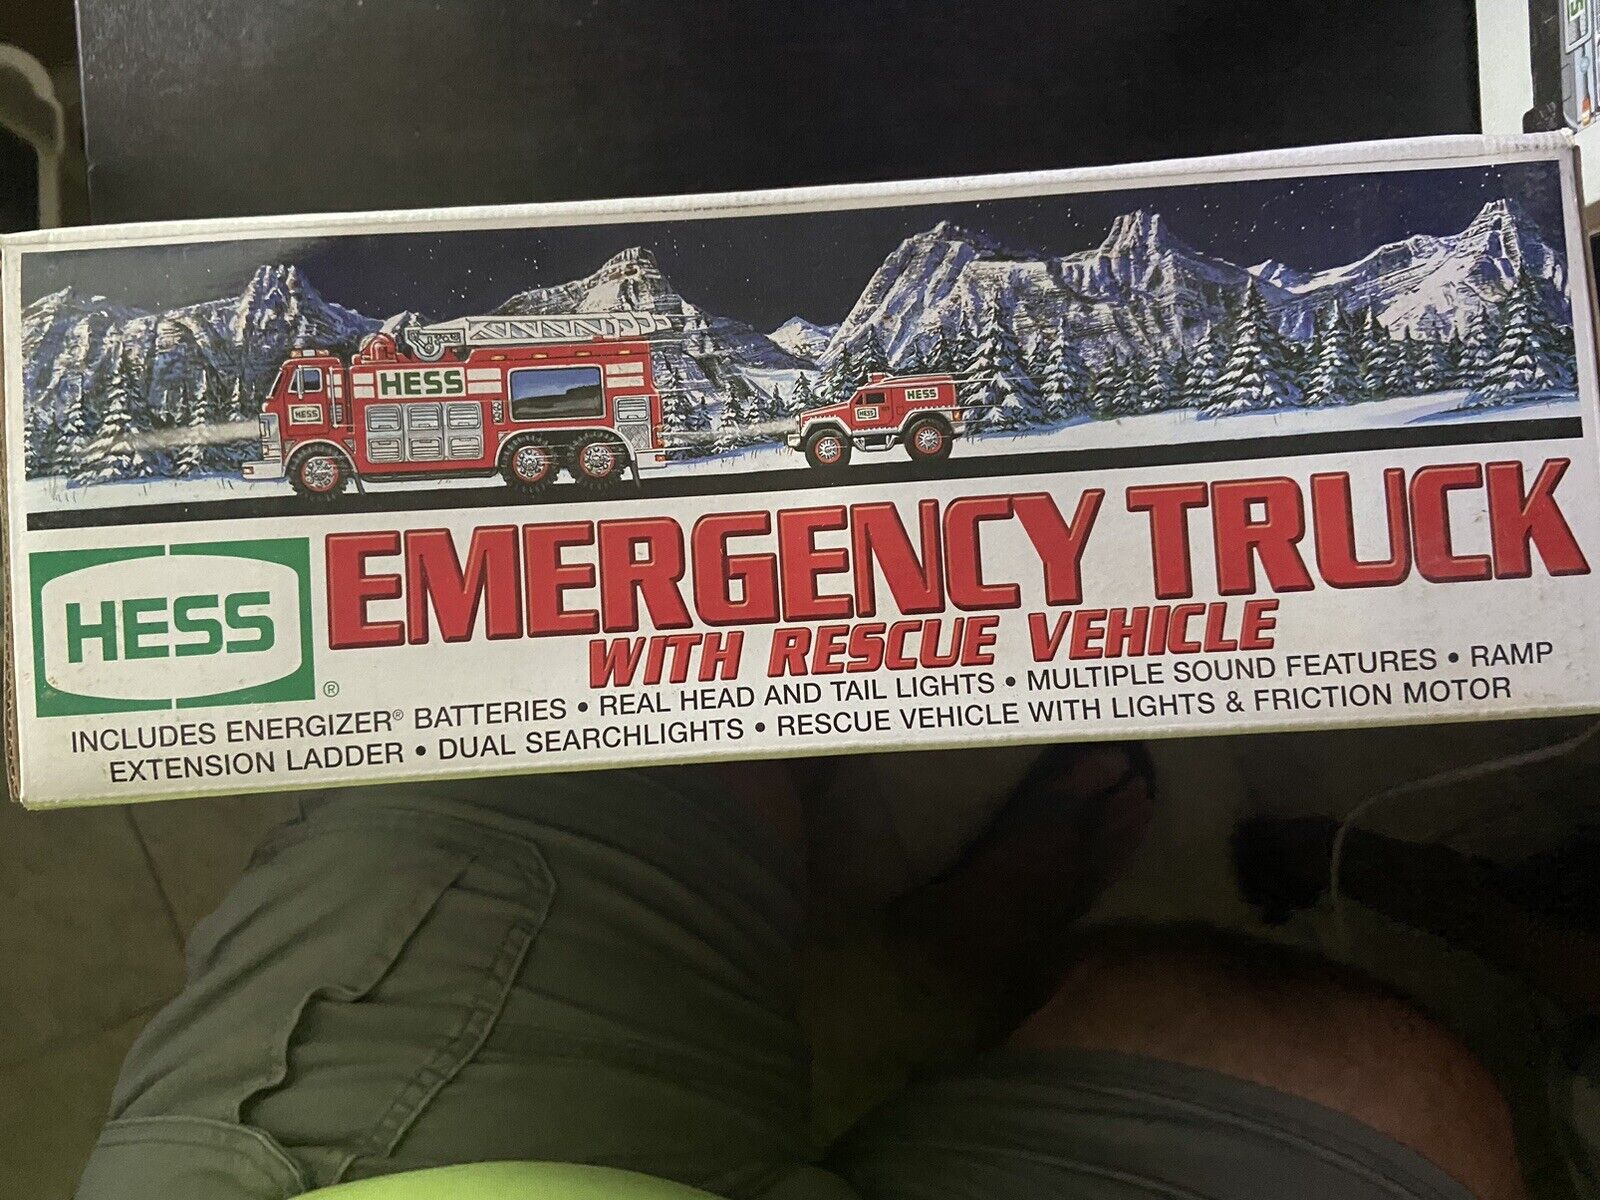 Hess 2005 Emergency Truck With Rescue Vehicle - N128